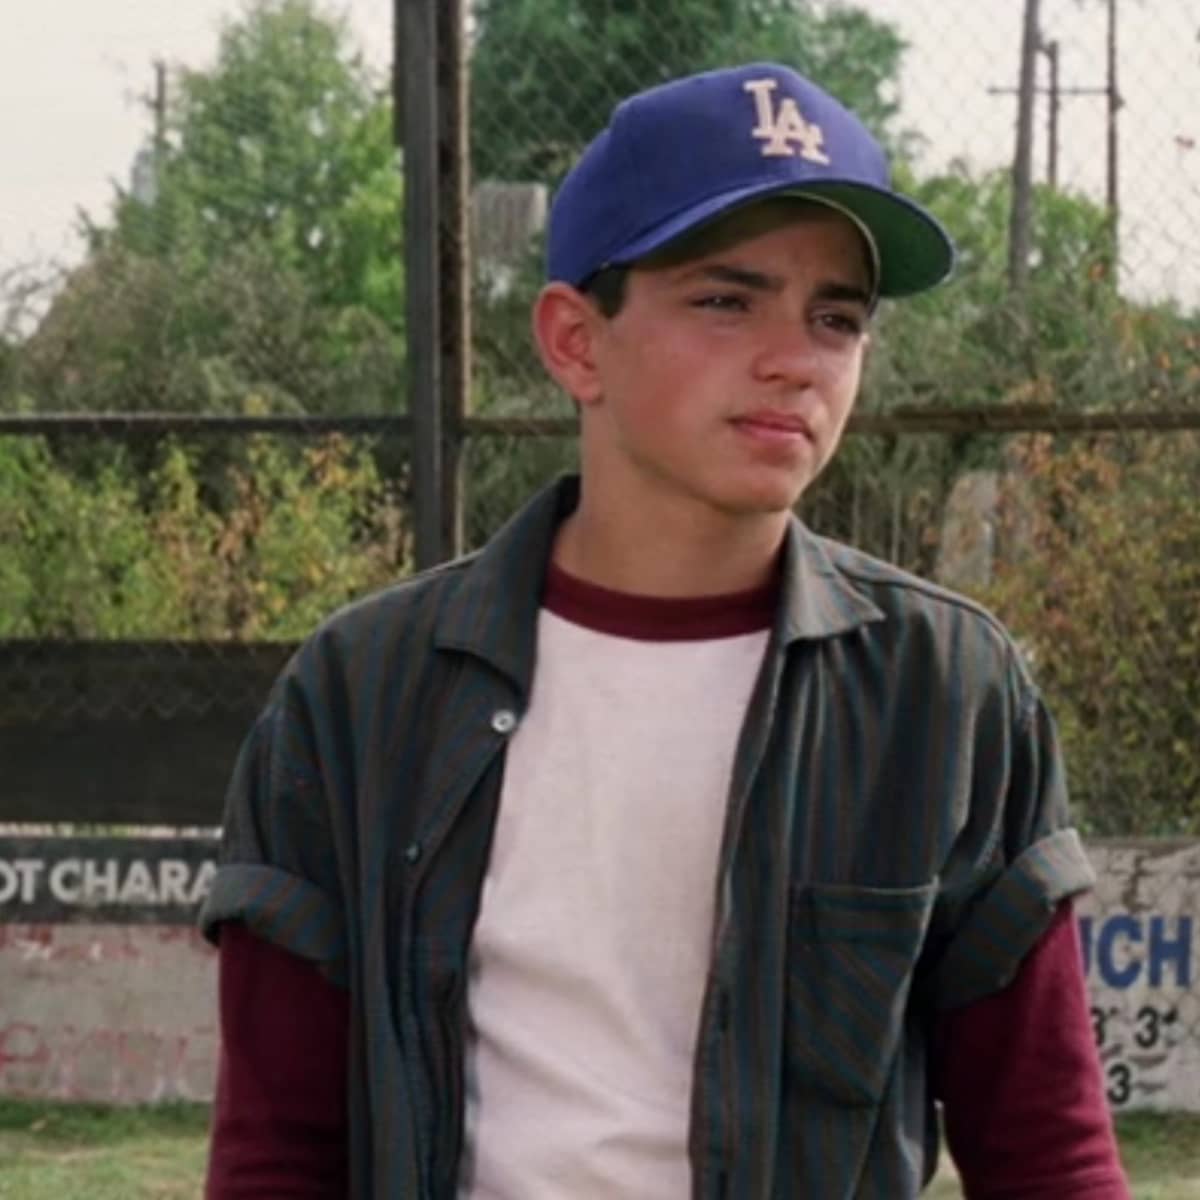 Baseball Movies Thatll Scratch Your Itch Till the Season Starts - LAmag